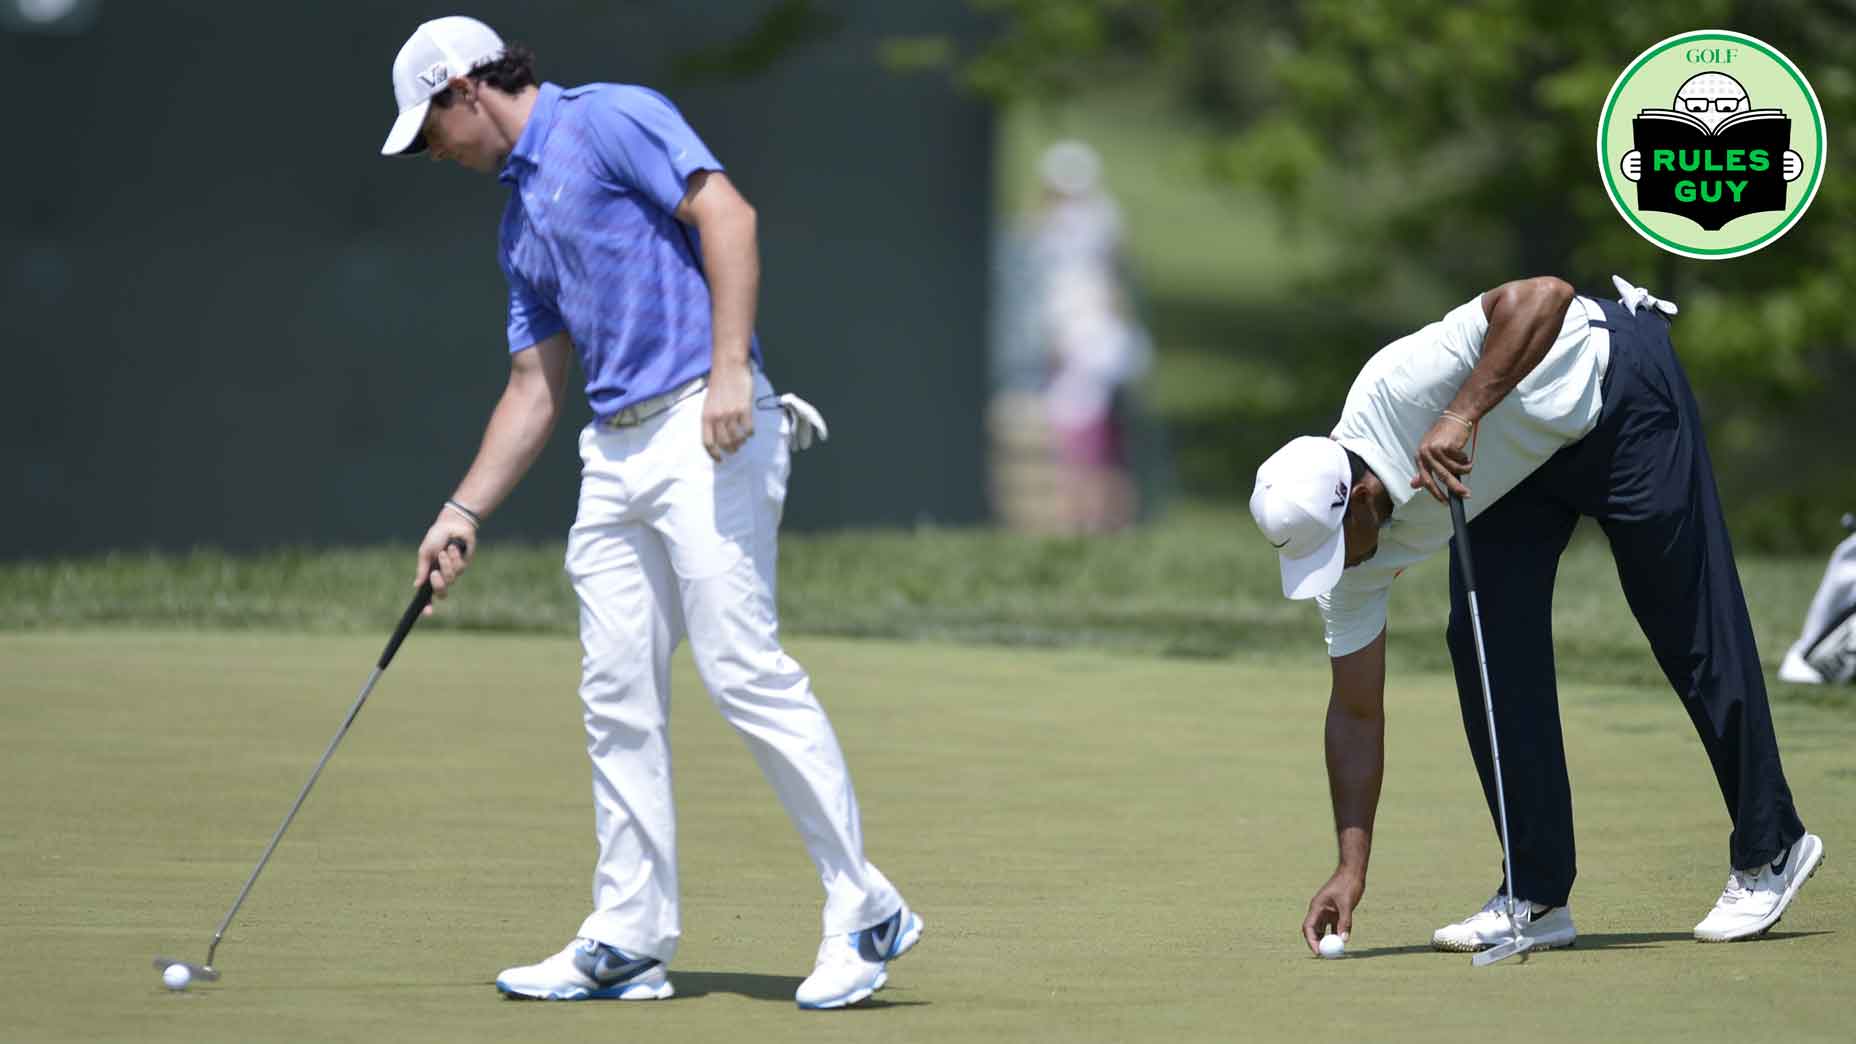 Tiger Woods (R) prepares to putt as Rory McIlroy of Northern Ireland taps his ball in on the third green during the third round of the US Open at Merion Golf Club on June 15, 2013 in Ardmore, Pennsylvania.